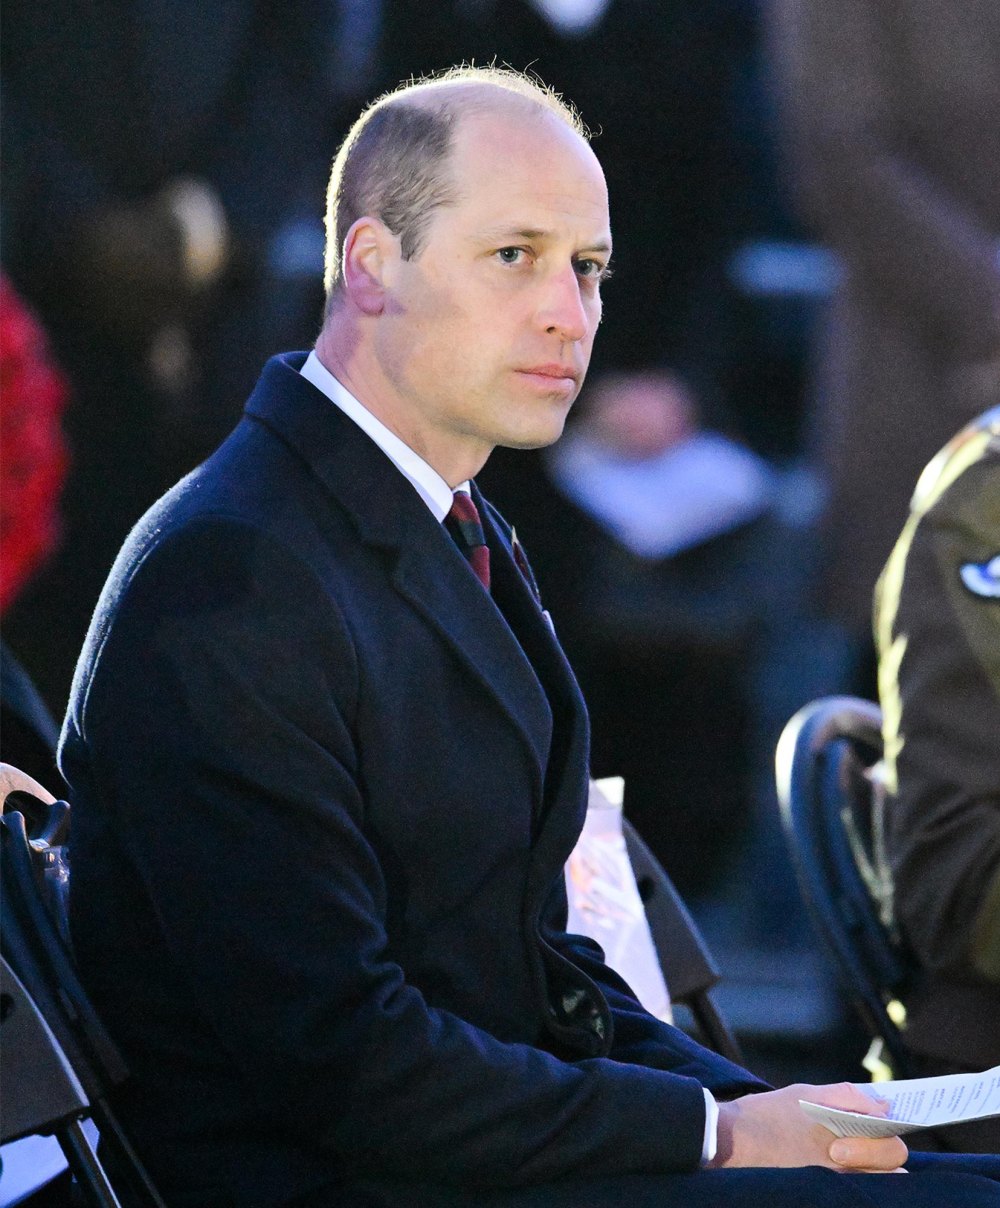 Omid Scobie s Book Claims Palace Pulled Out All the Stops to Squash Prince William Affair Rumors 751